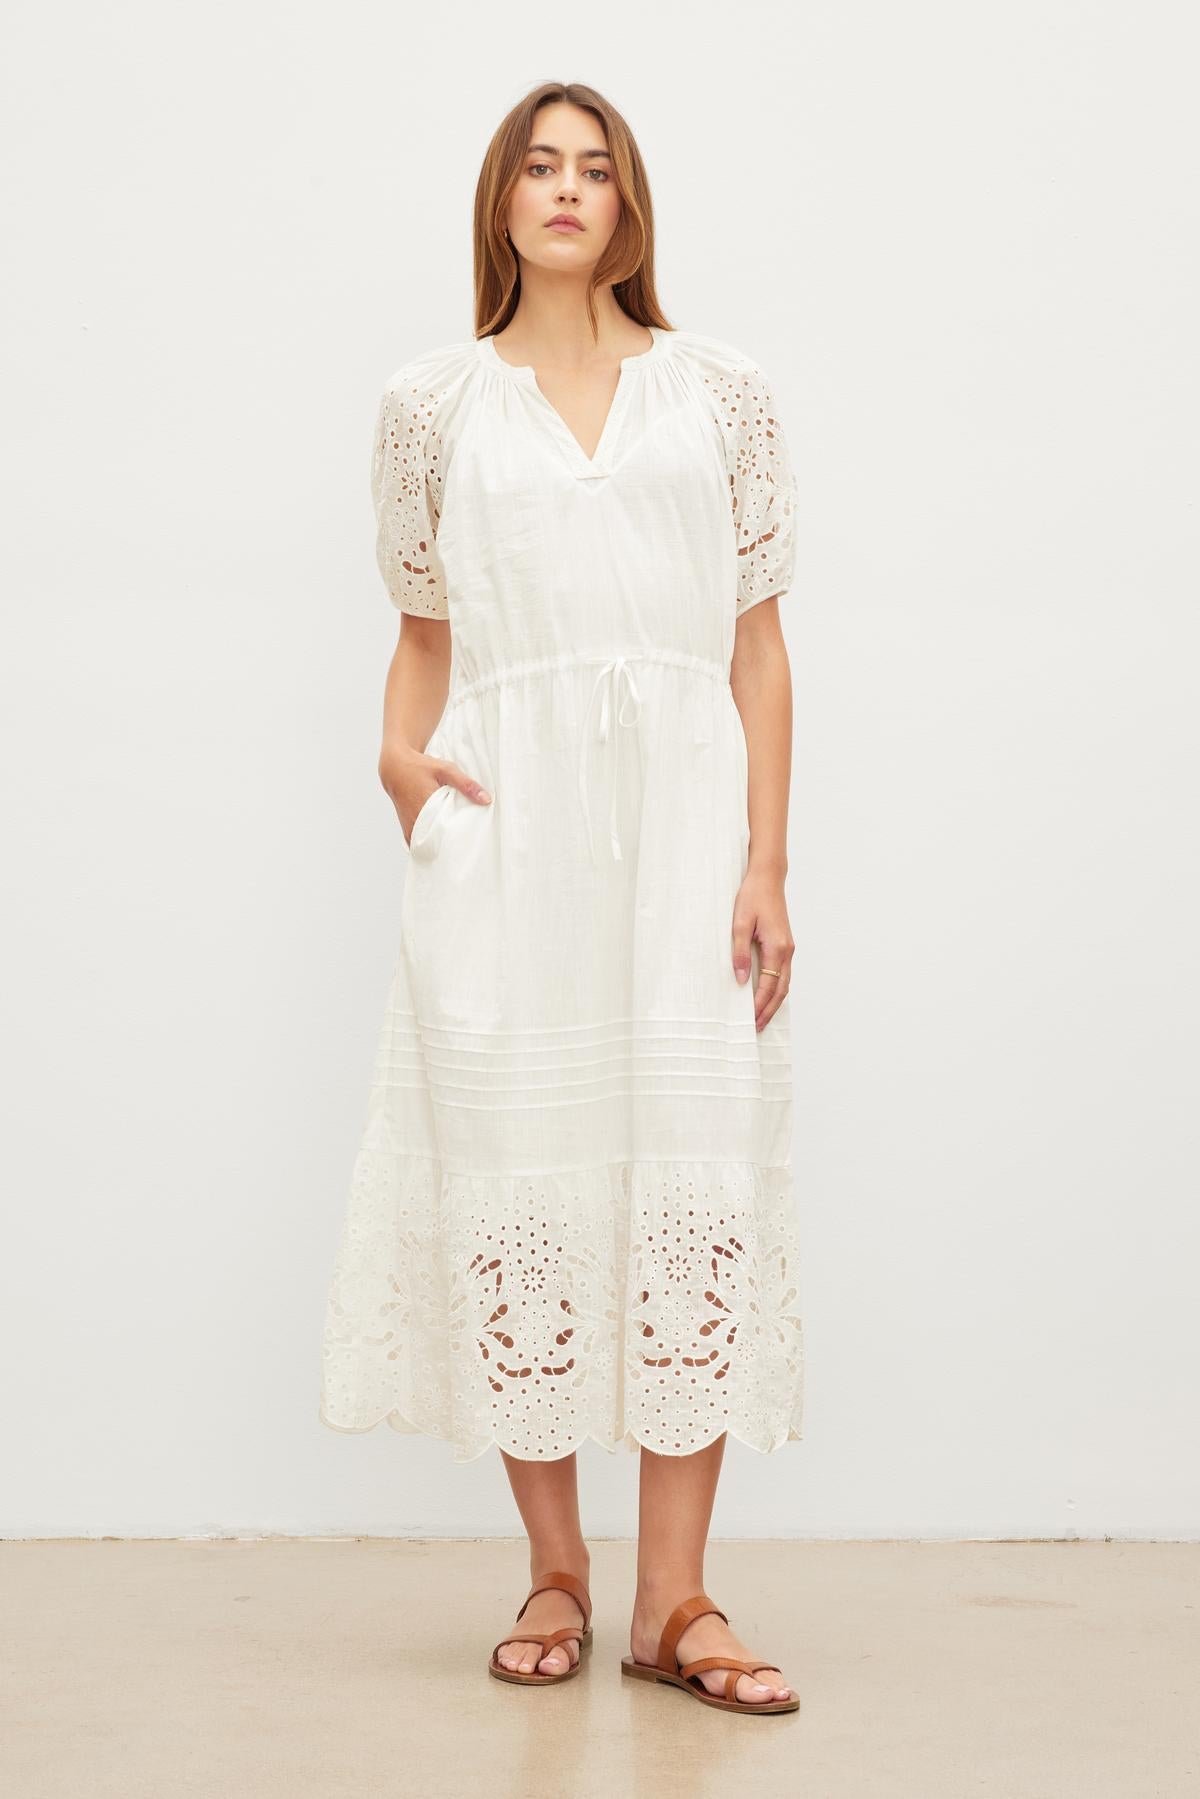 A woman standing in a white room wearing a white, NADIA EMBROIDERED COTTON LACE DRESS with short sleeves and brown sandals. She has shoulder-length brown hair and a neutral expression.-36454007537857